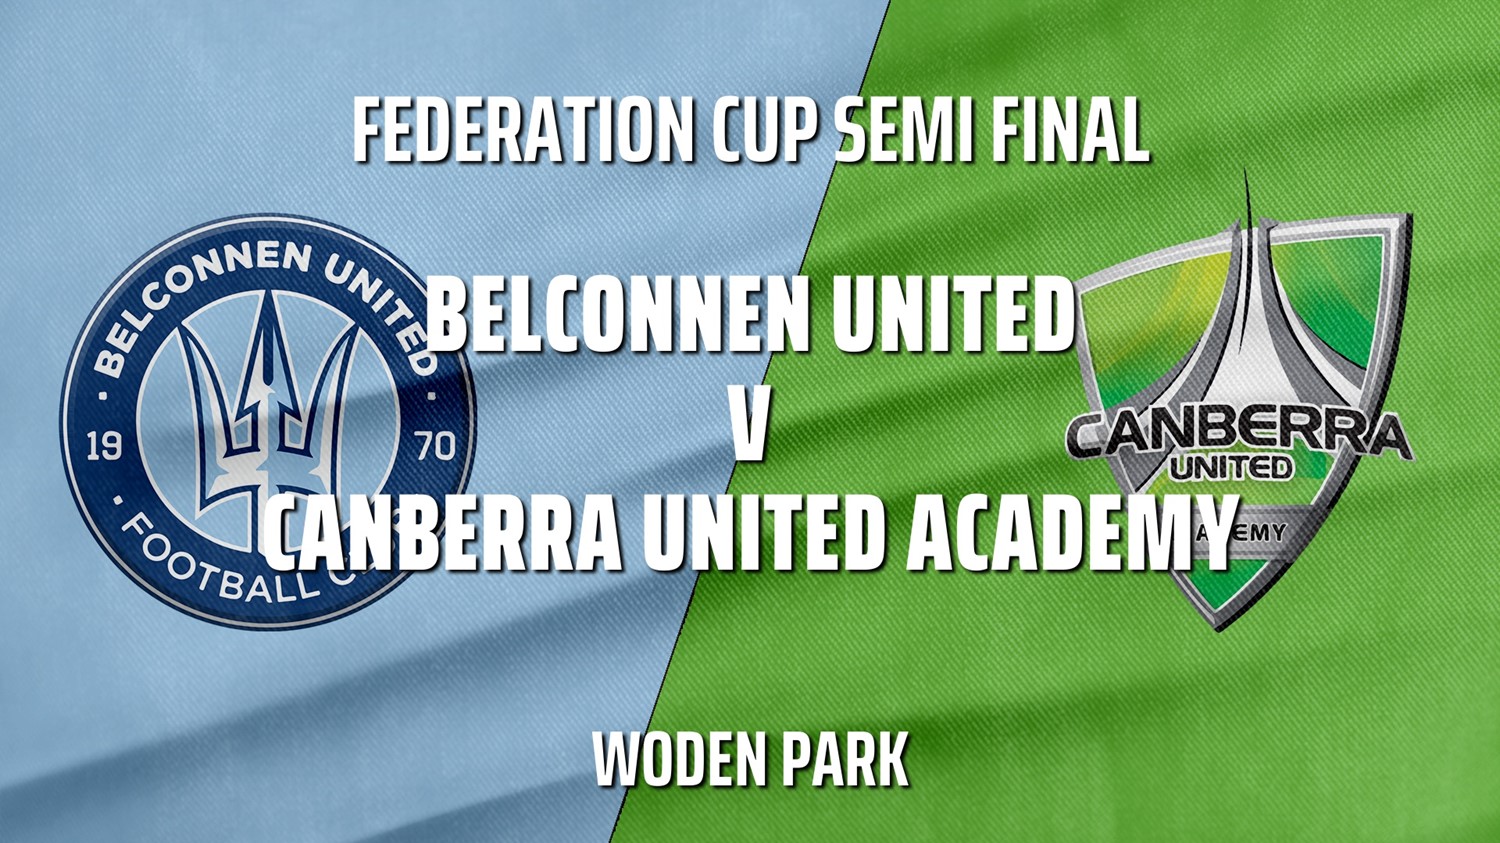 220511-Federation Cup Semi Final - Belconnen United (women) v Canberra United Academy Slate Image